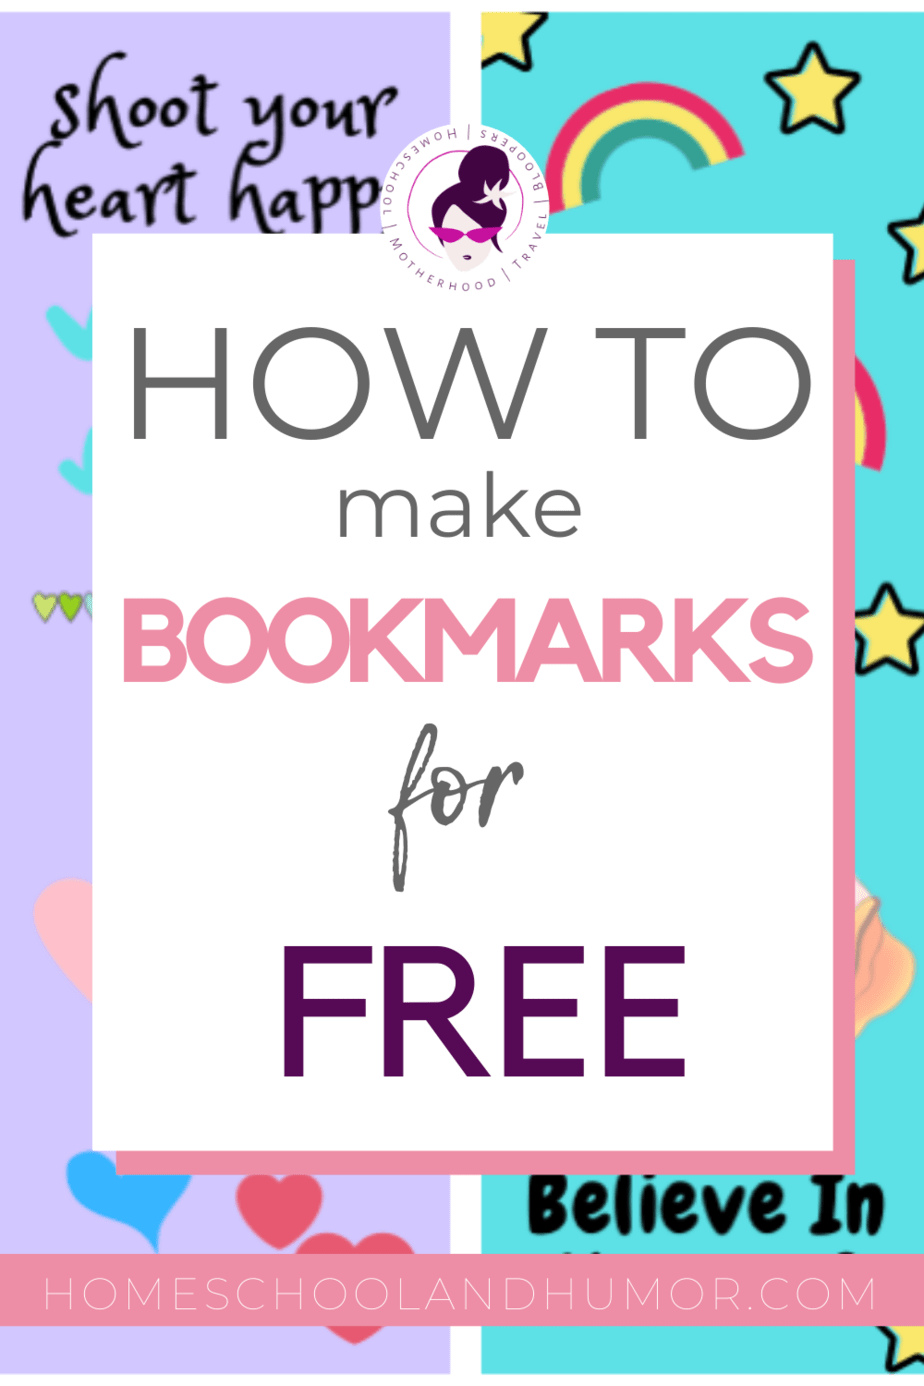 How To Make Bookmarks For Free (Free Bookmarks Included!)